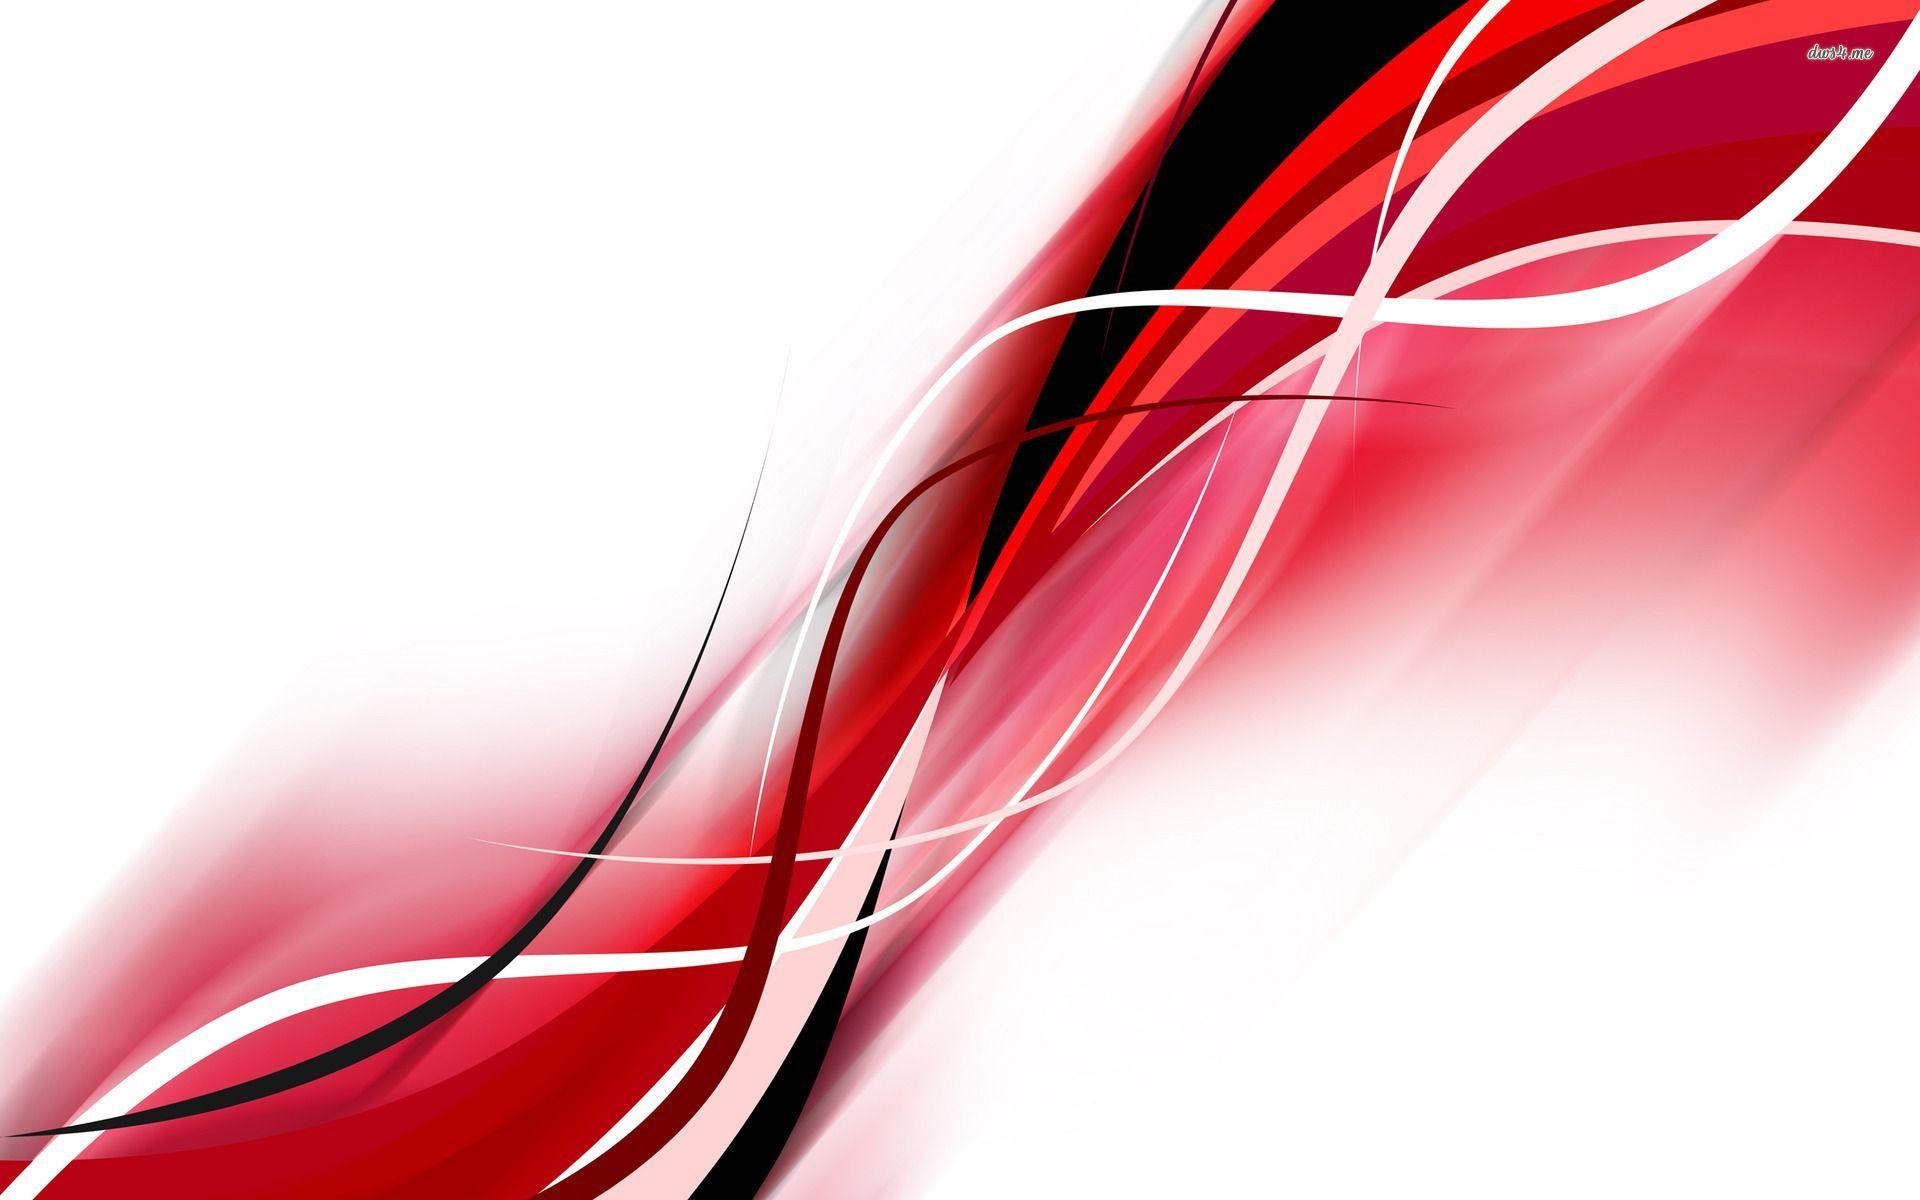 1920x1200 Wallpapers For > Red And White Background Hd